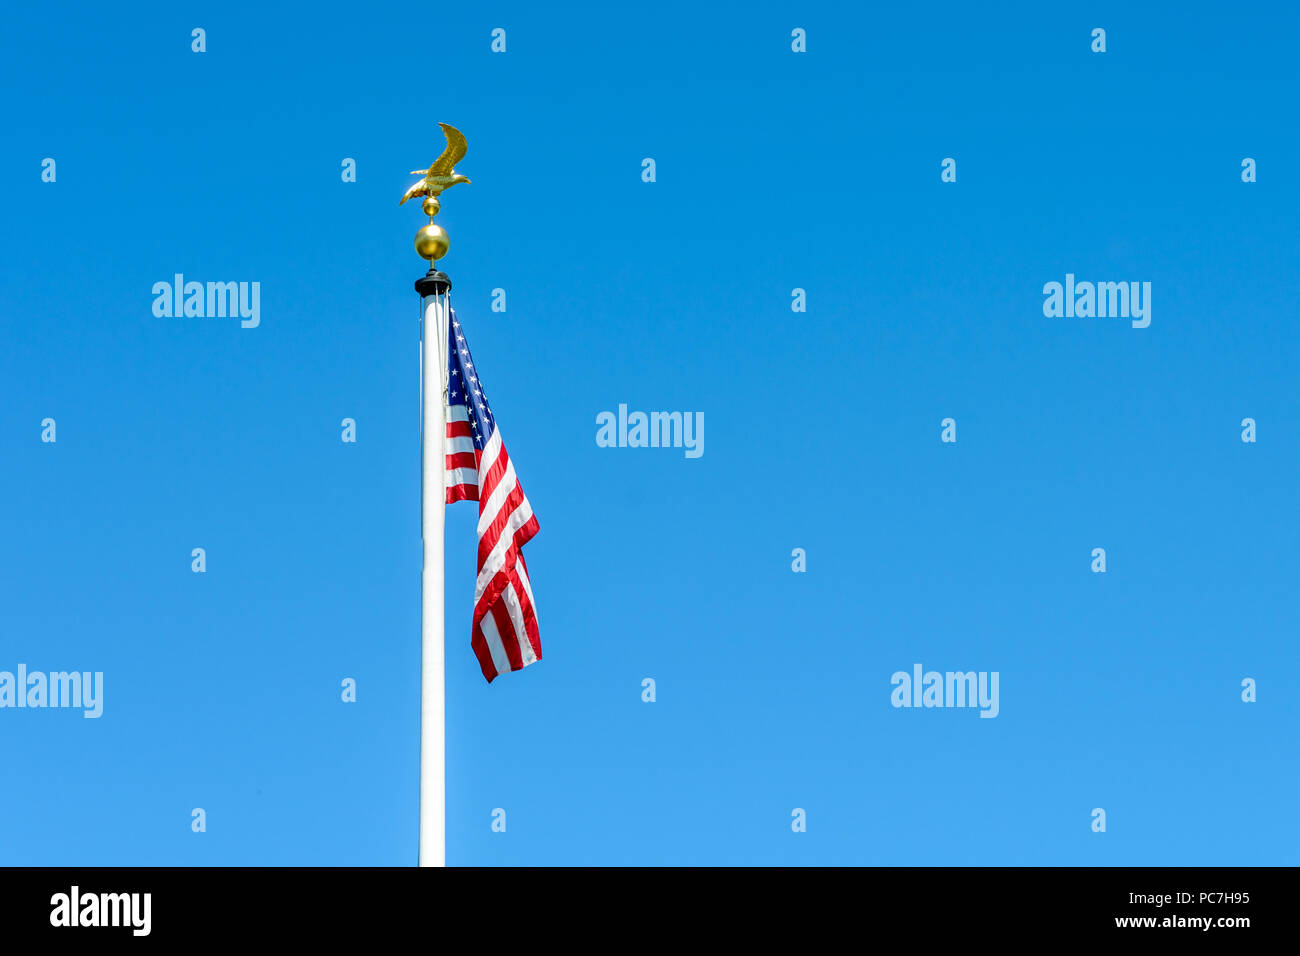 The flag of the United States of America dangling at full-mast on a white pole topped with a golden eagle on ball against blue sky. Stock Photo